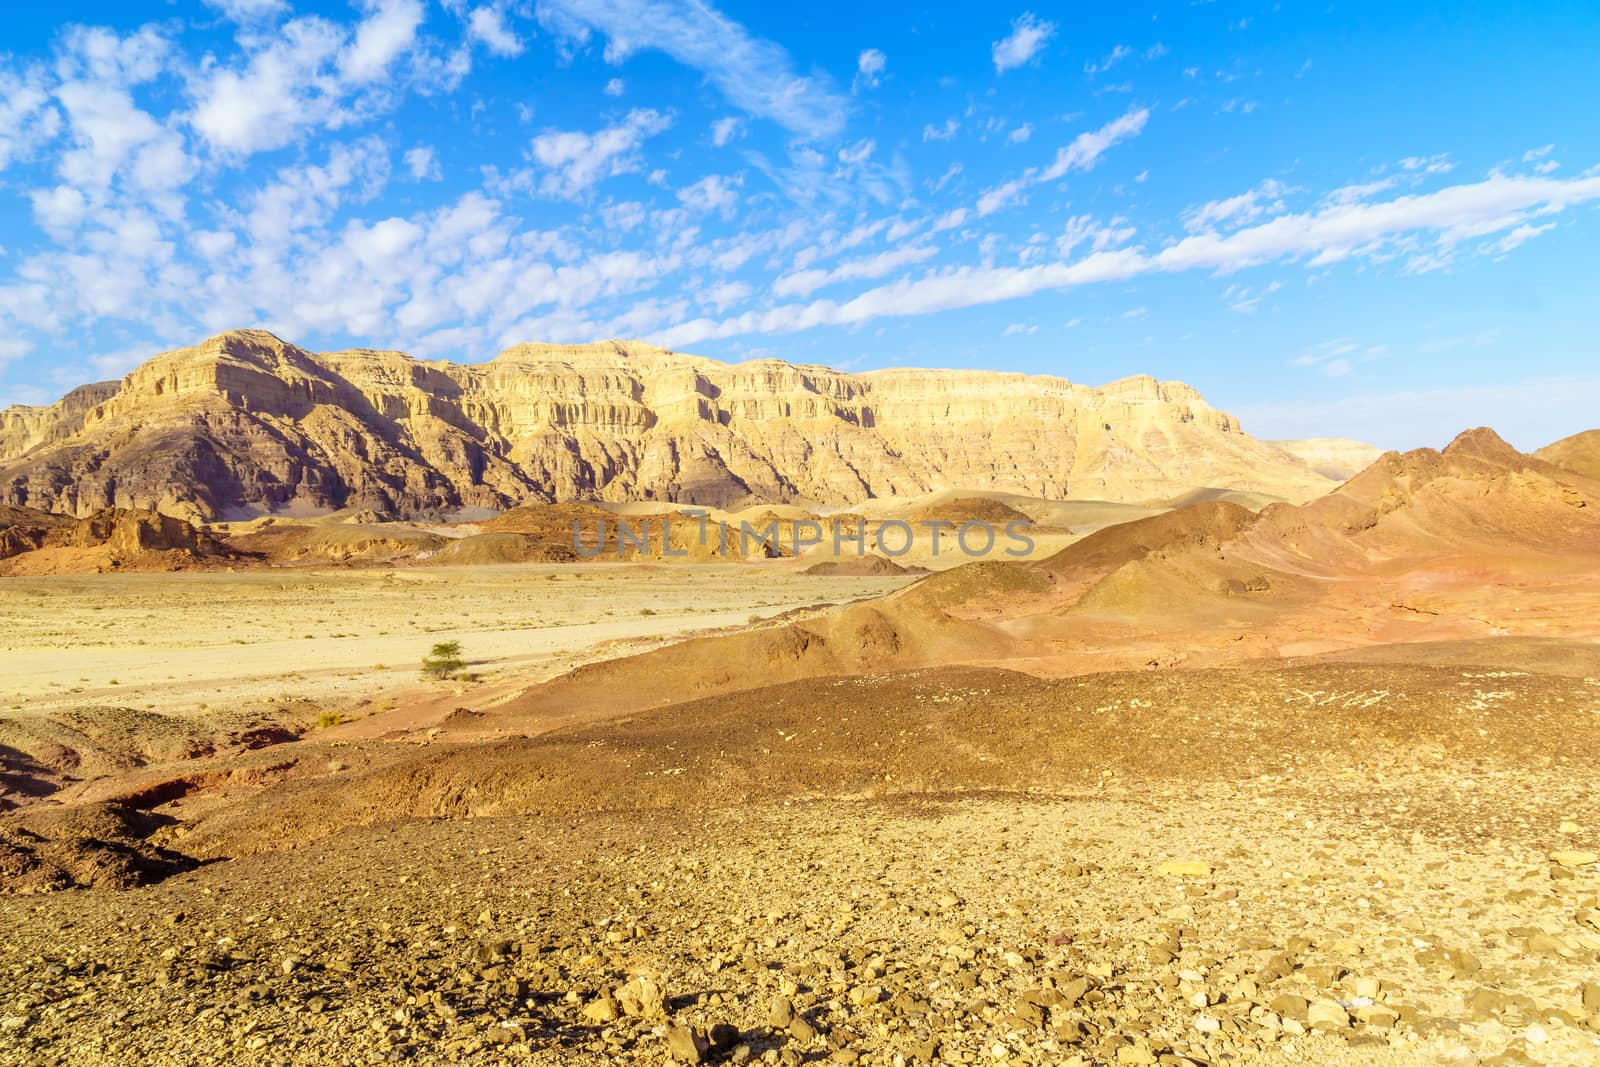 View of landscape and rock formations, in the Timna Valley, Arava desert, southern Israel